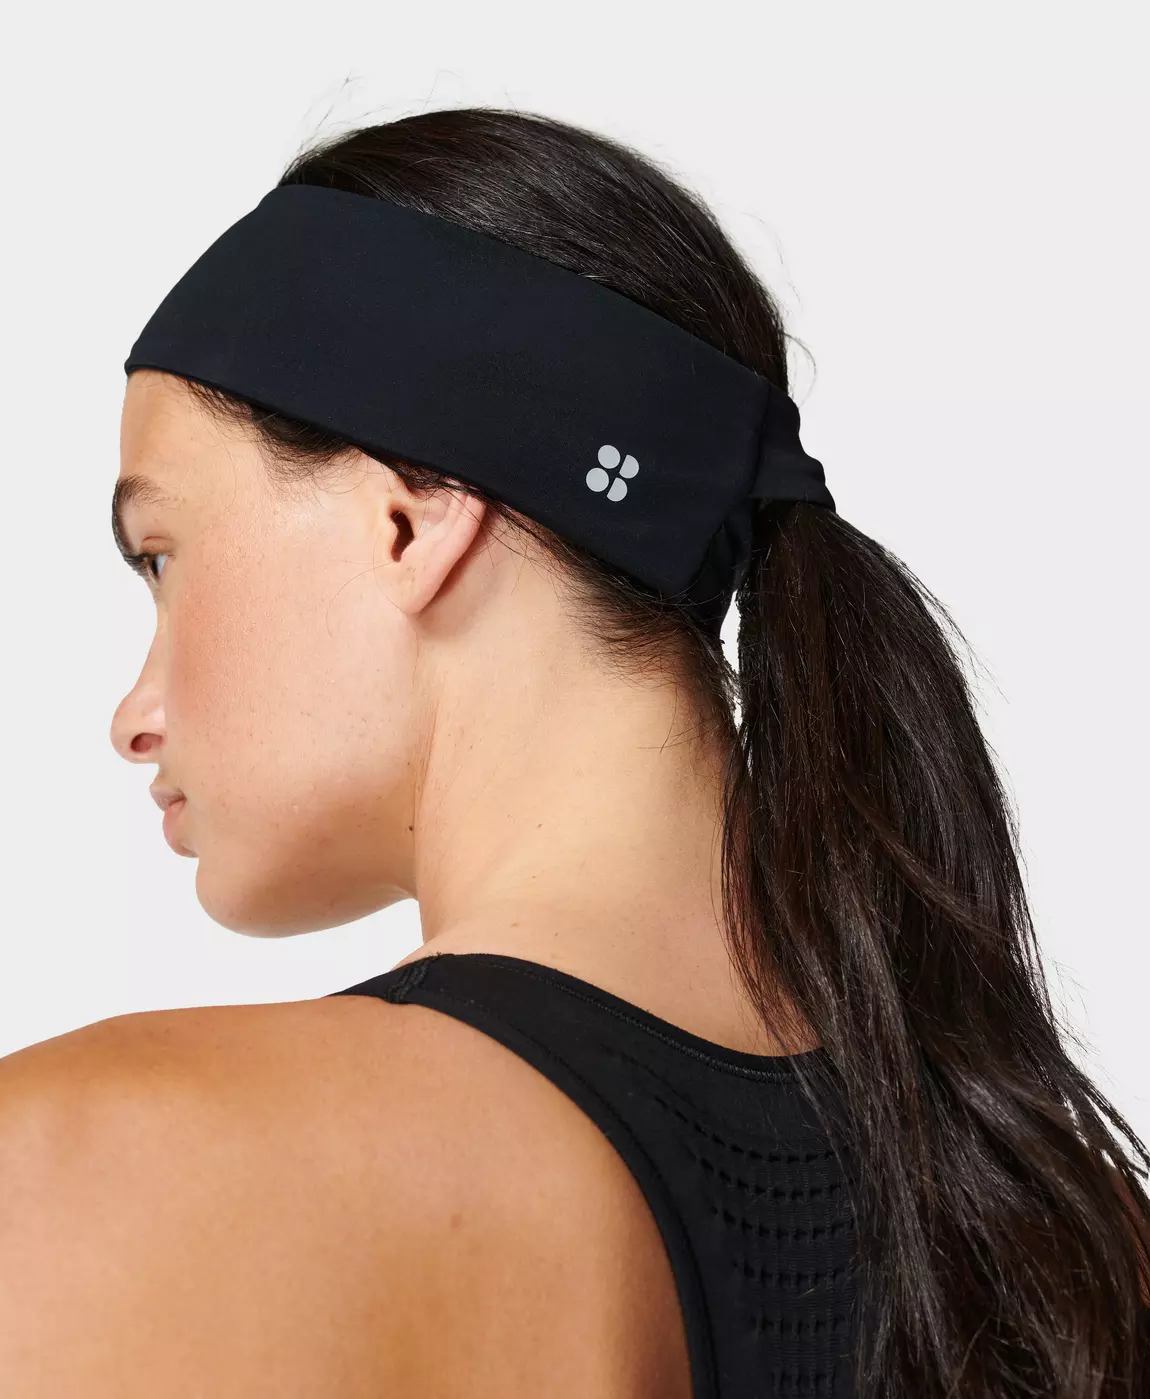 TrailHeads Women's Running Ponytail Headband Made in The USA French Blue/Black 